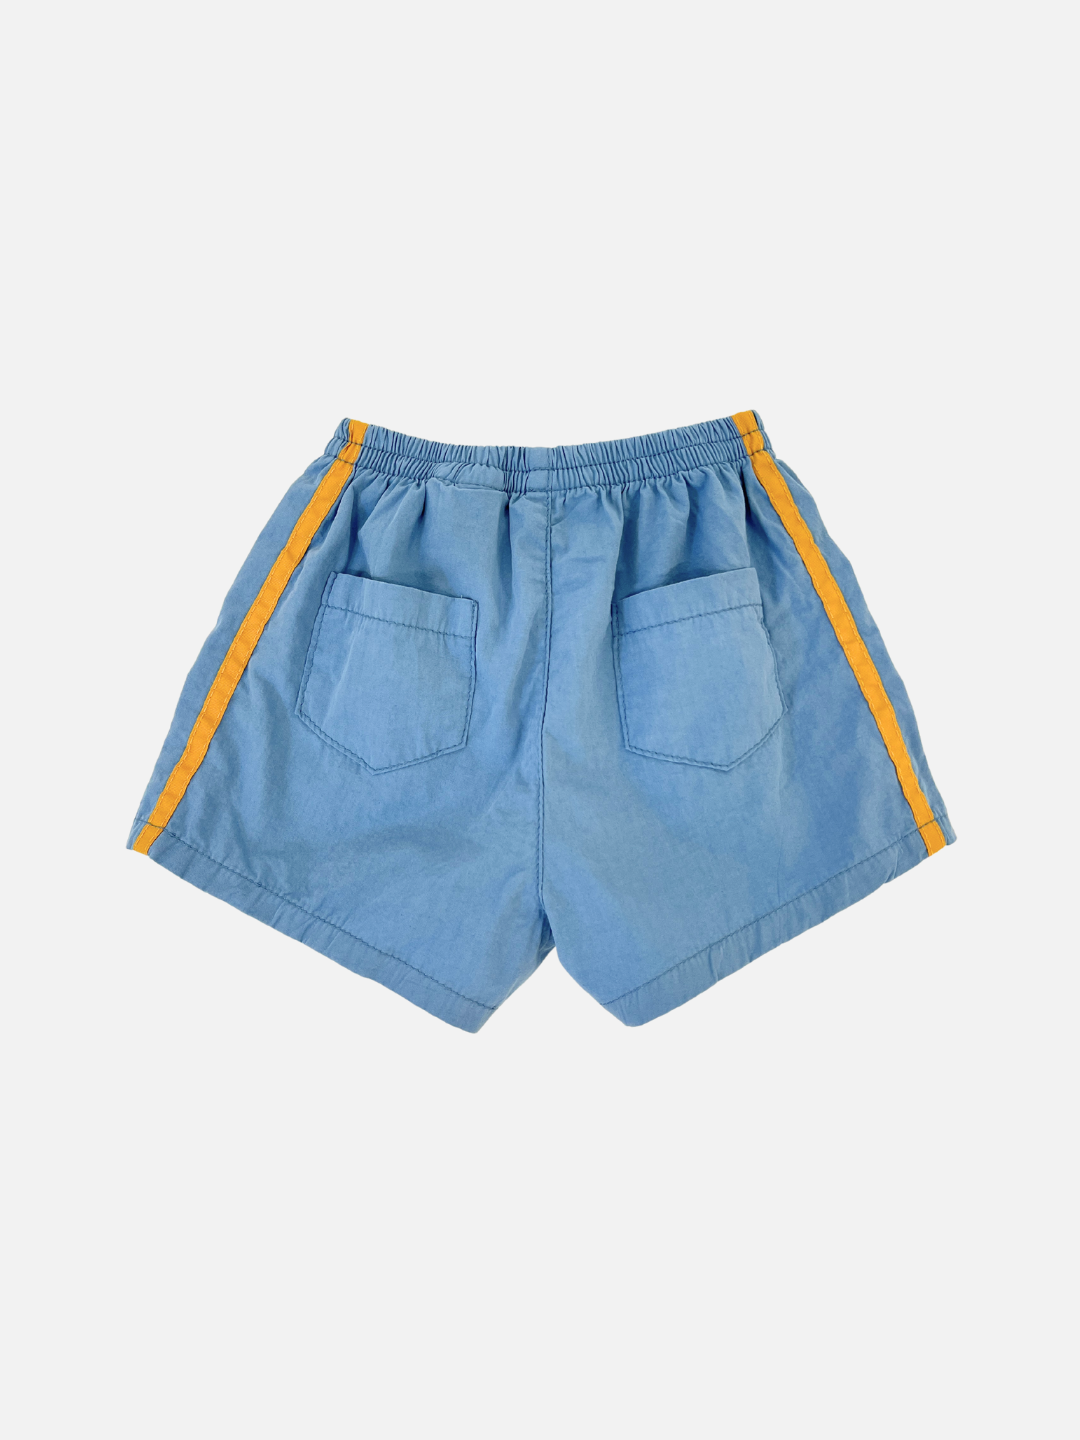 Back view of the kids' sky blue shorts with yellow stripes on the sides and two back pockets. 